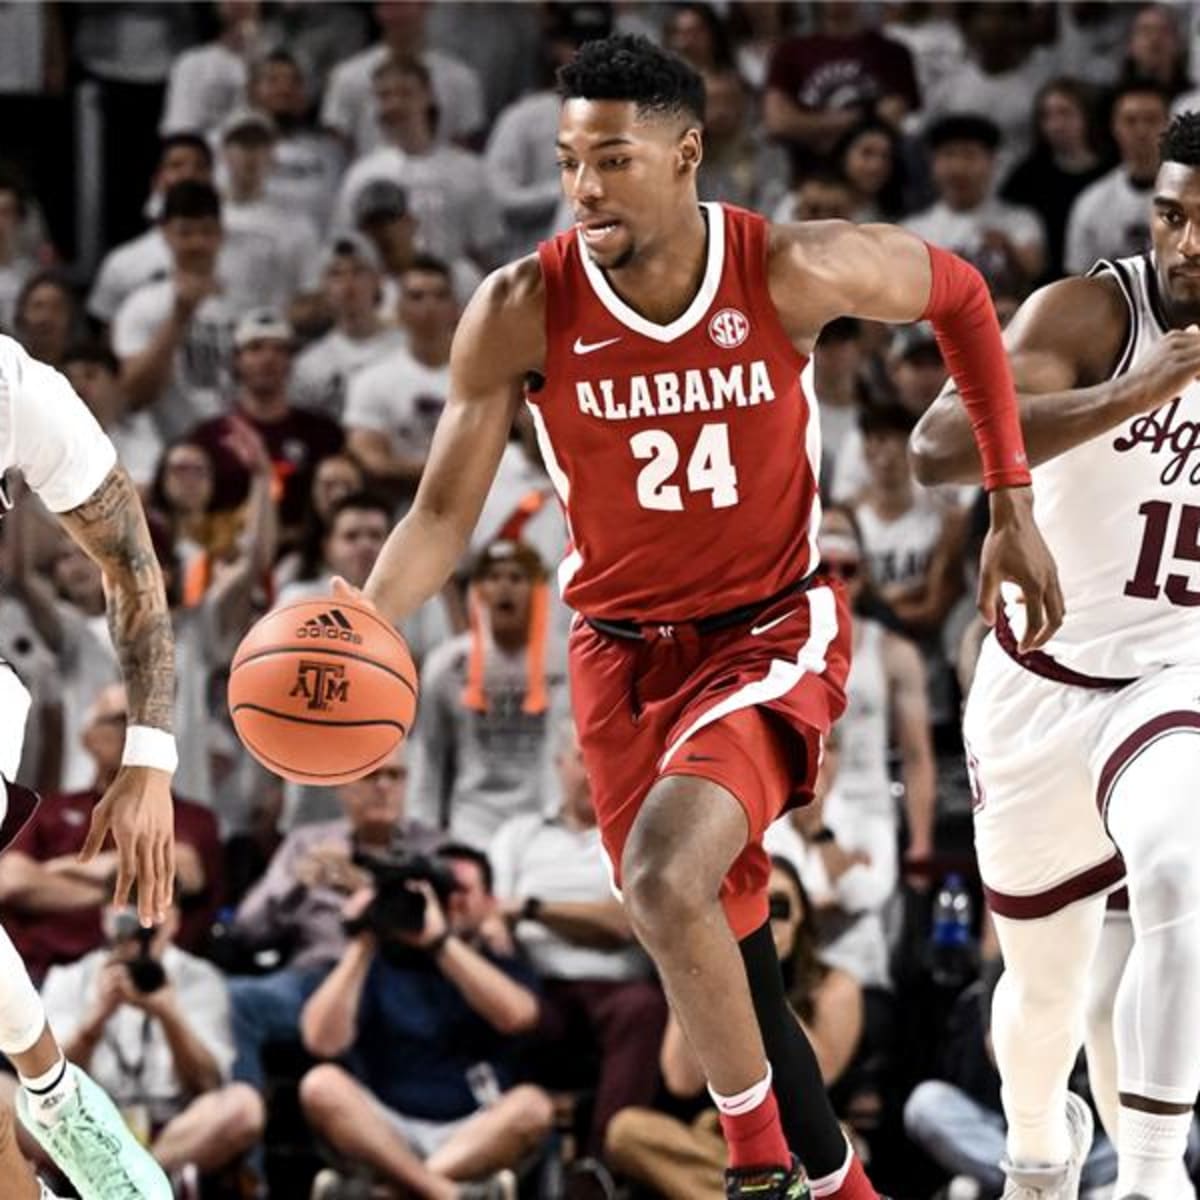 COLLEGE STATION, TX - MARCH 04: Alabama Crimson Tide guard Nimari Burnett  (25) drives from the wing during the basketball game between the Alabama  Crimson Tide and Texas A&M Aggies at Reed